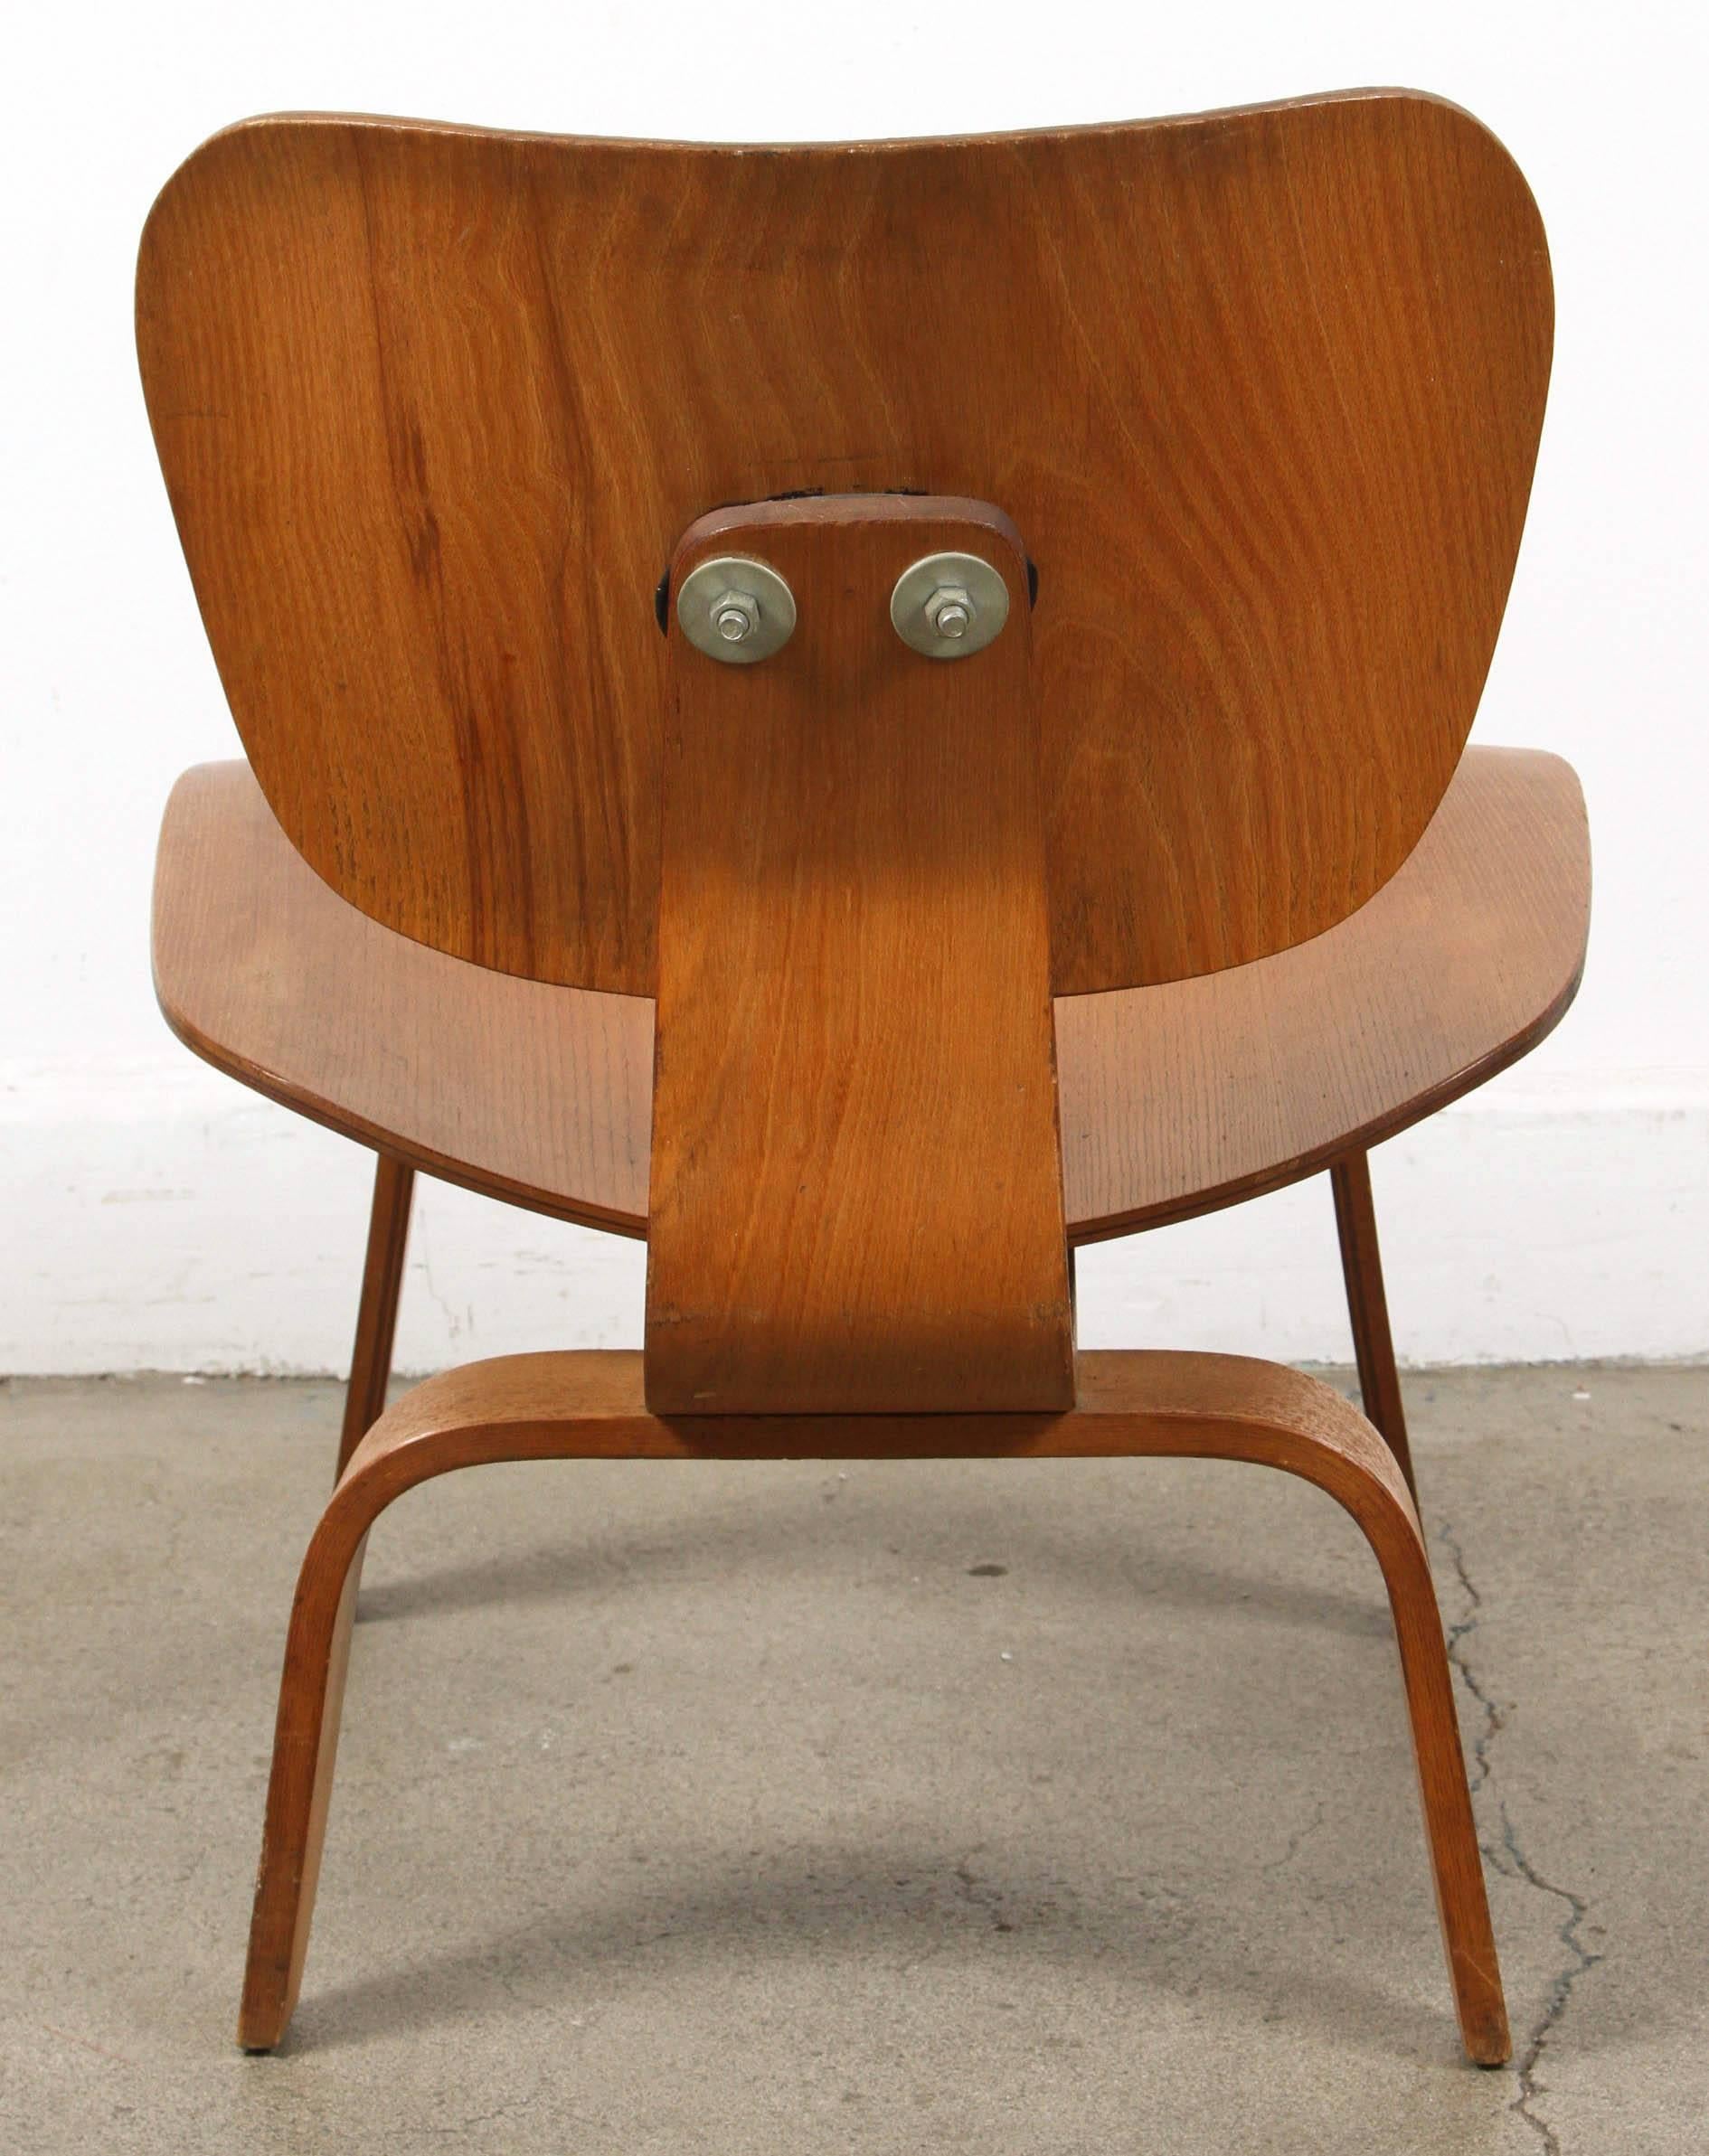 Hand-Crafted Early Charles Eames Bentwood Lounge Chair Wood, LCW